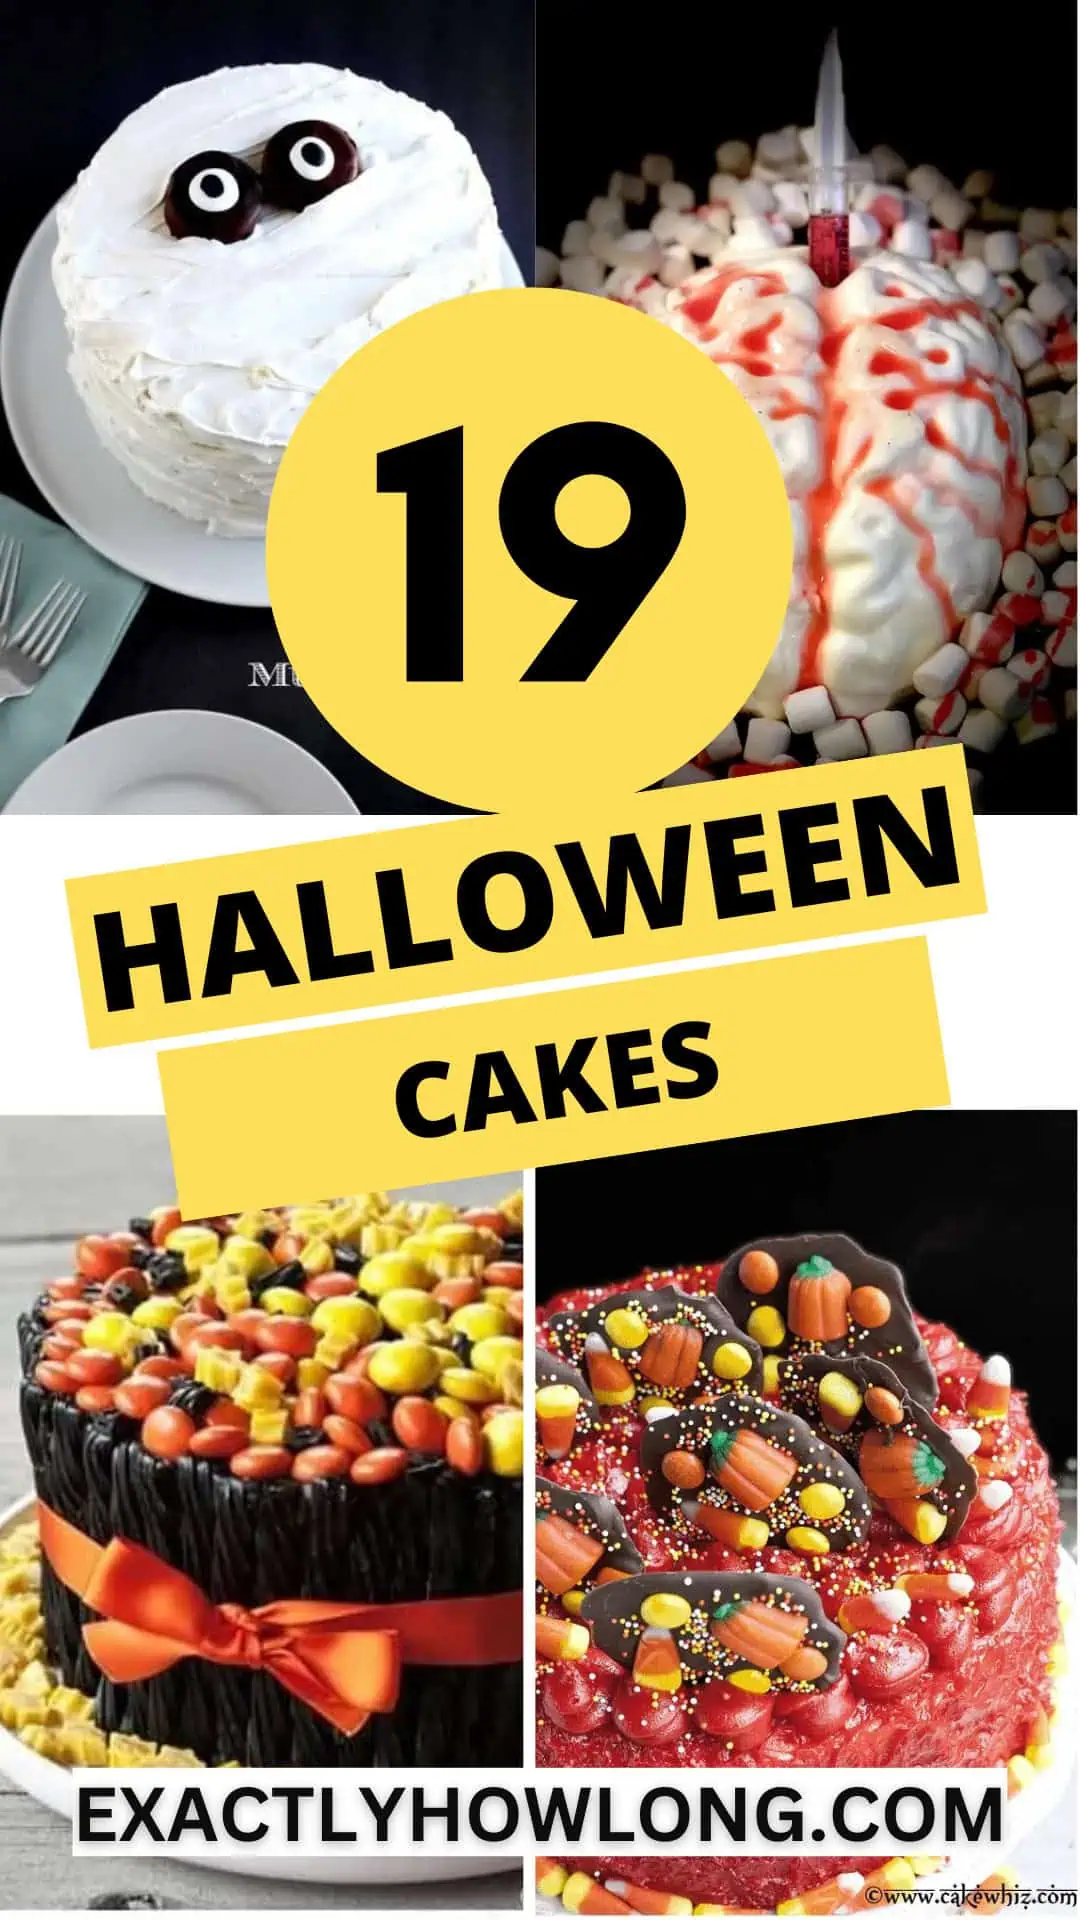 Spooky yet cute Halloween cakes with an easy and aesthetic touch